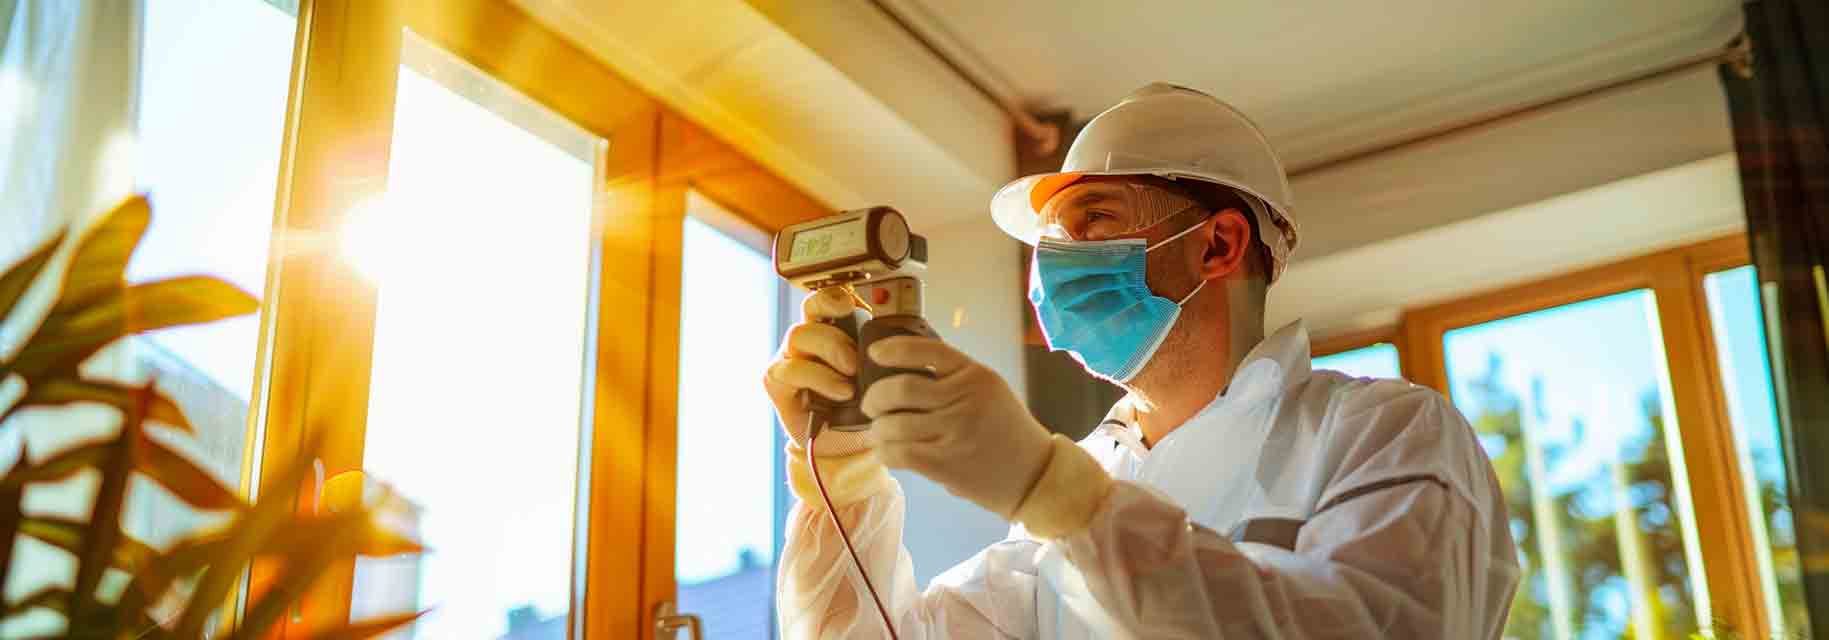 A professional mold inspection is important to prevent toxic mold.